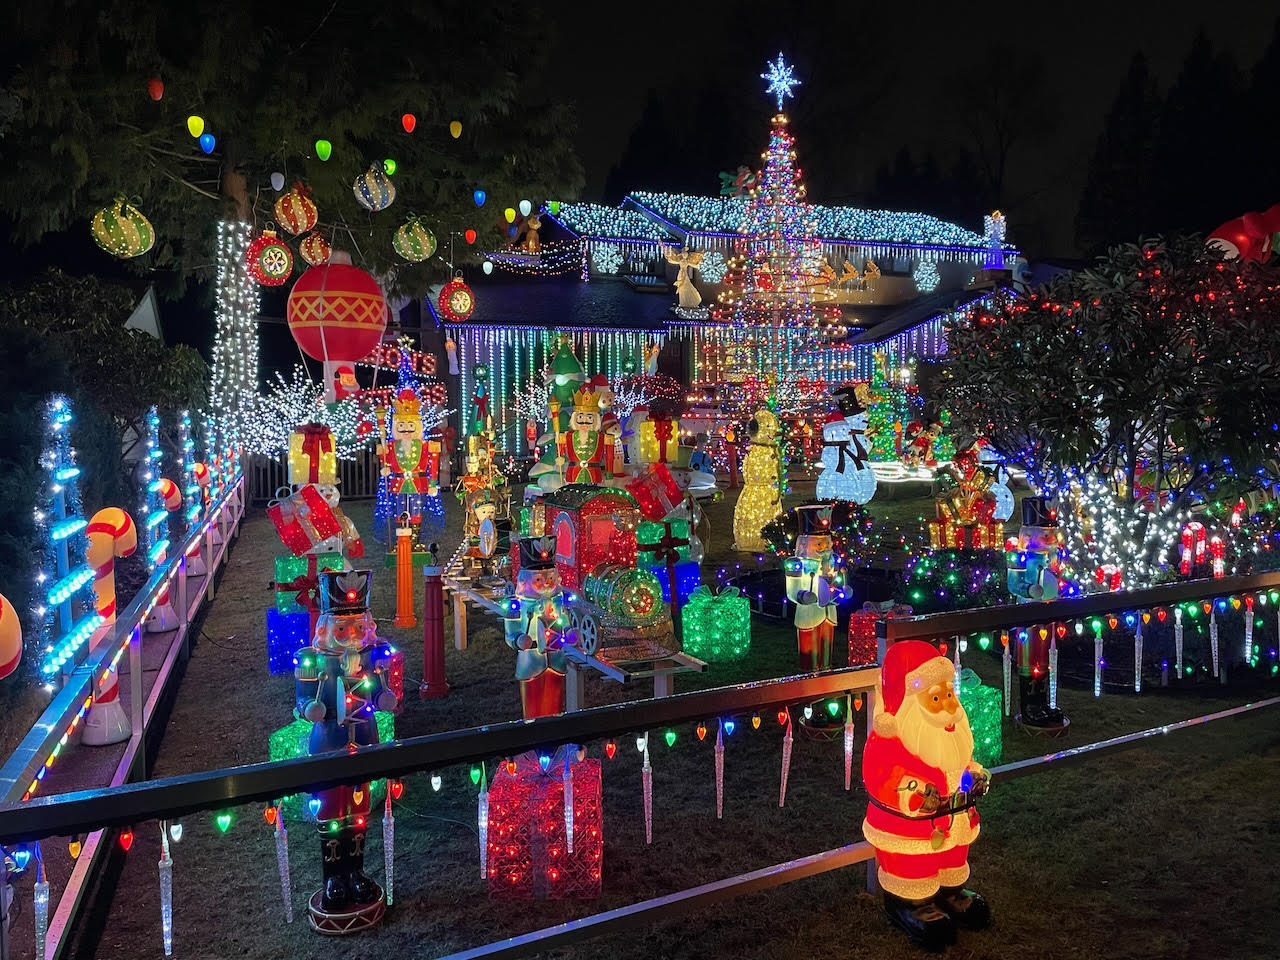 Burnaby’s Popular Christmas Lights Display Just Lit Up Again For a Good Cause